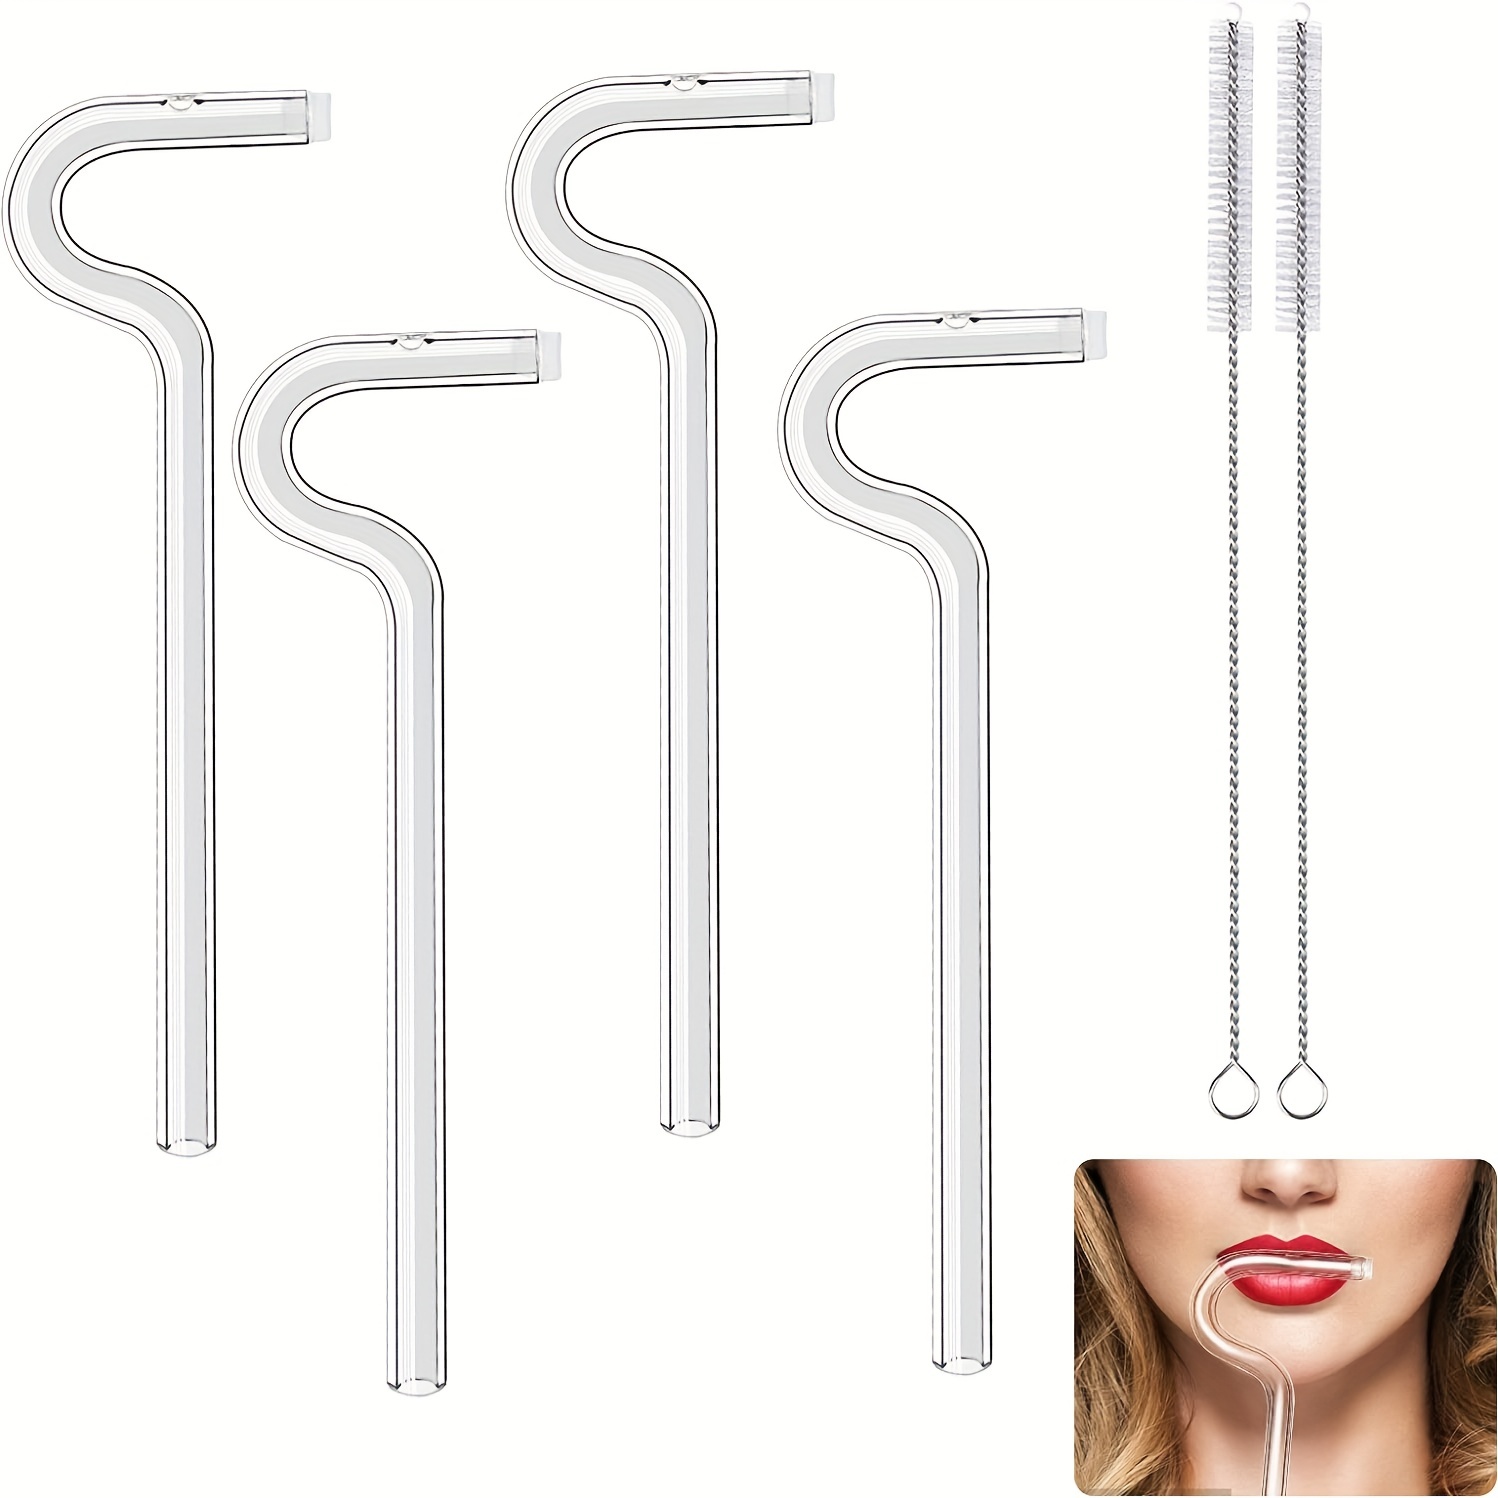 Anti Wrinkle Straw Reusable Glass Drinking Straw Flute Style Design Curved No  Wrinkle Prevent Wrinkles Sideways Straw